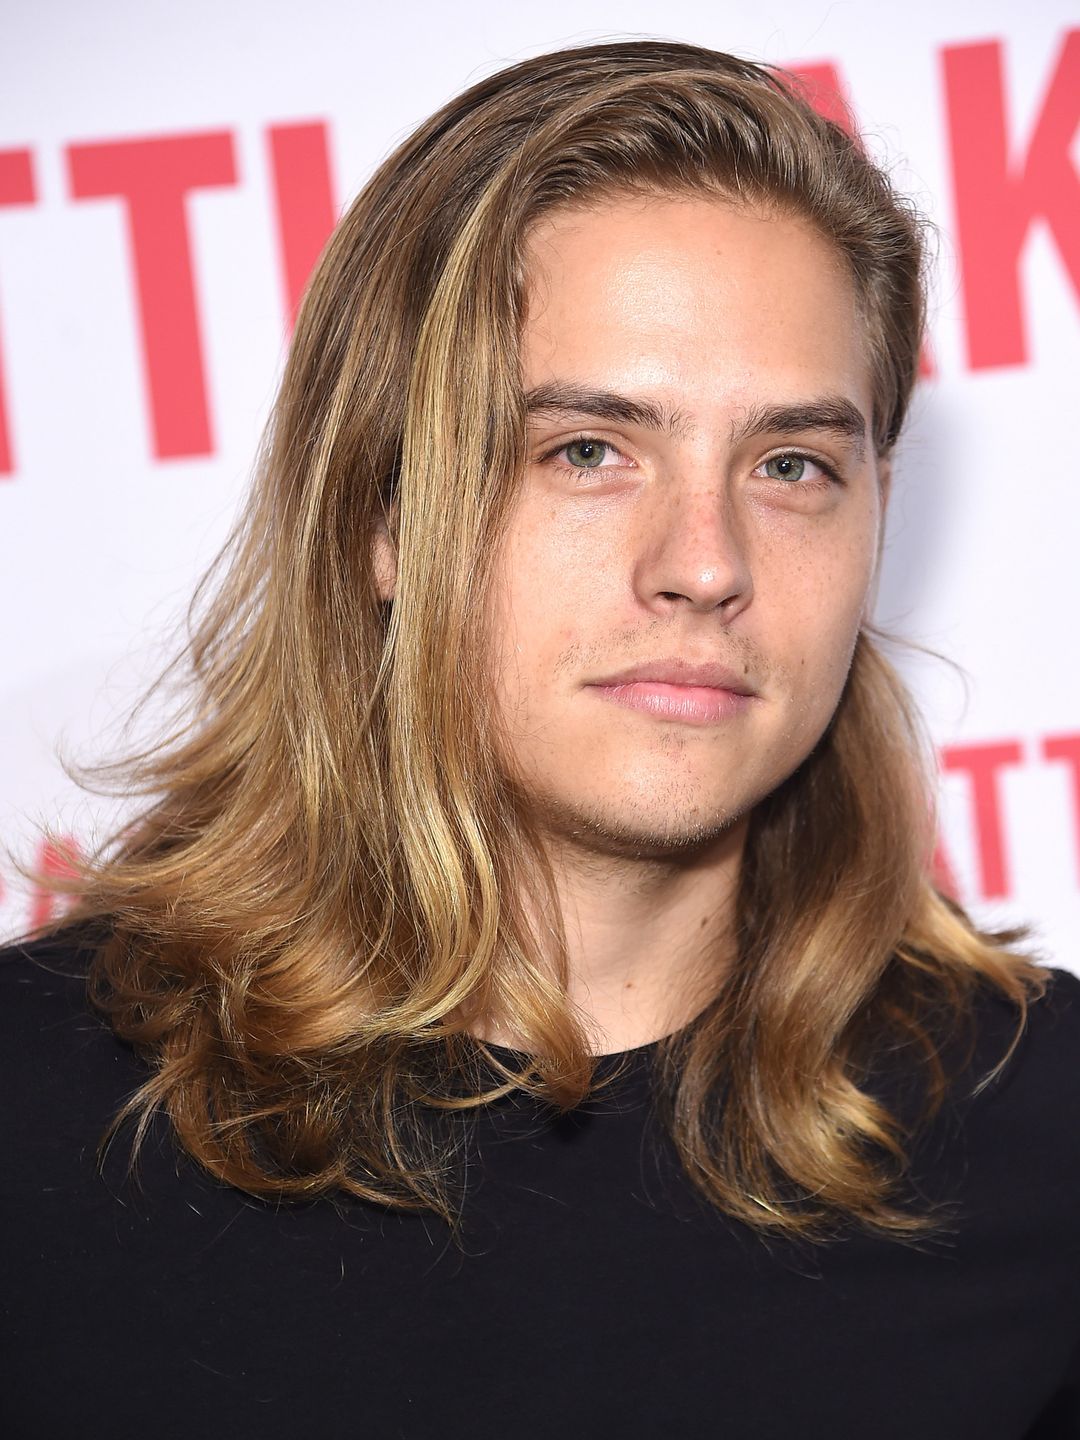 Dylan Sprouse childhood story